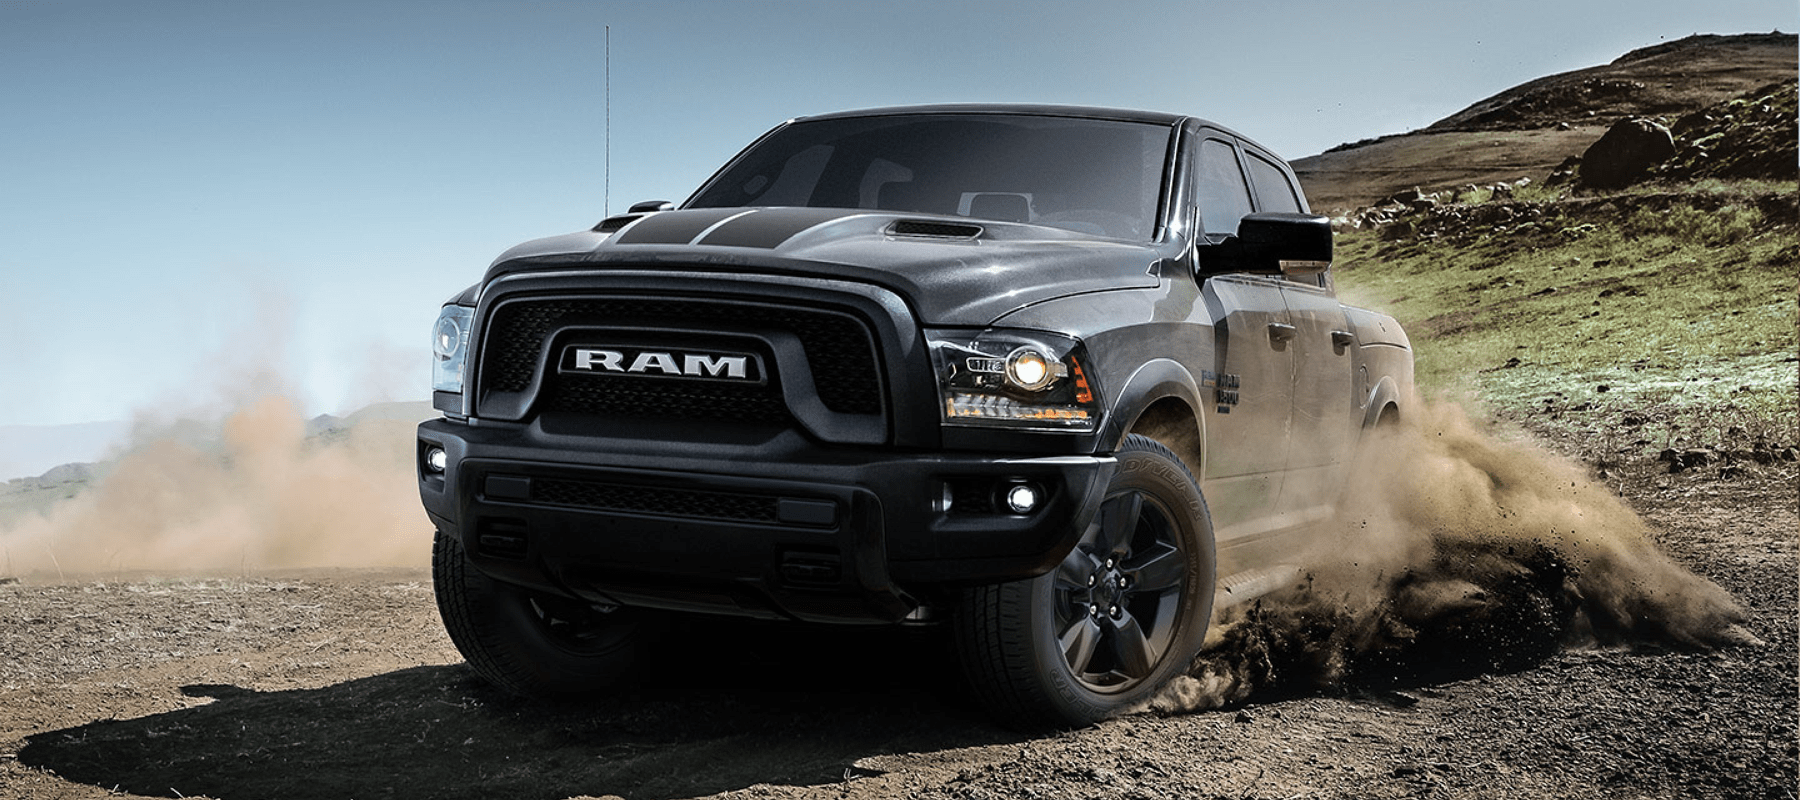 Ram 1500 Classic spinning in new dirt